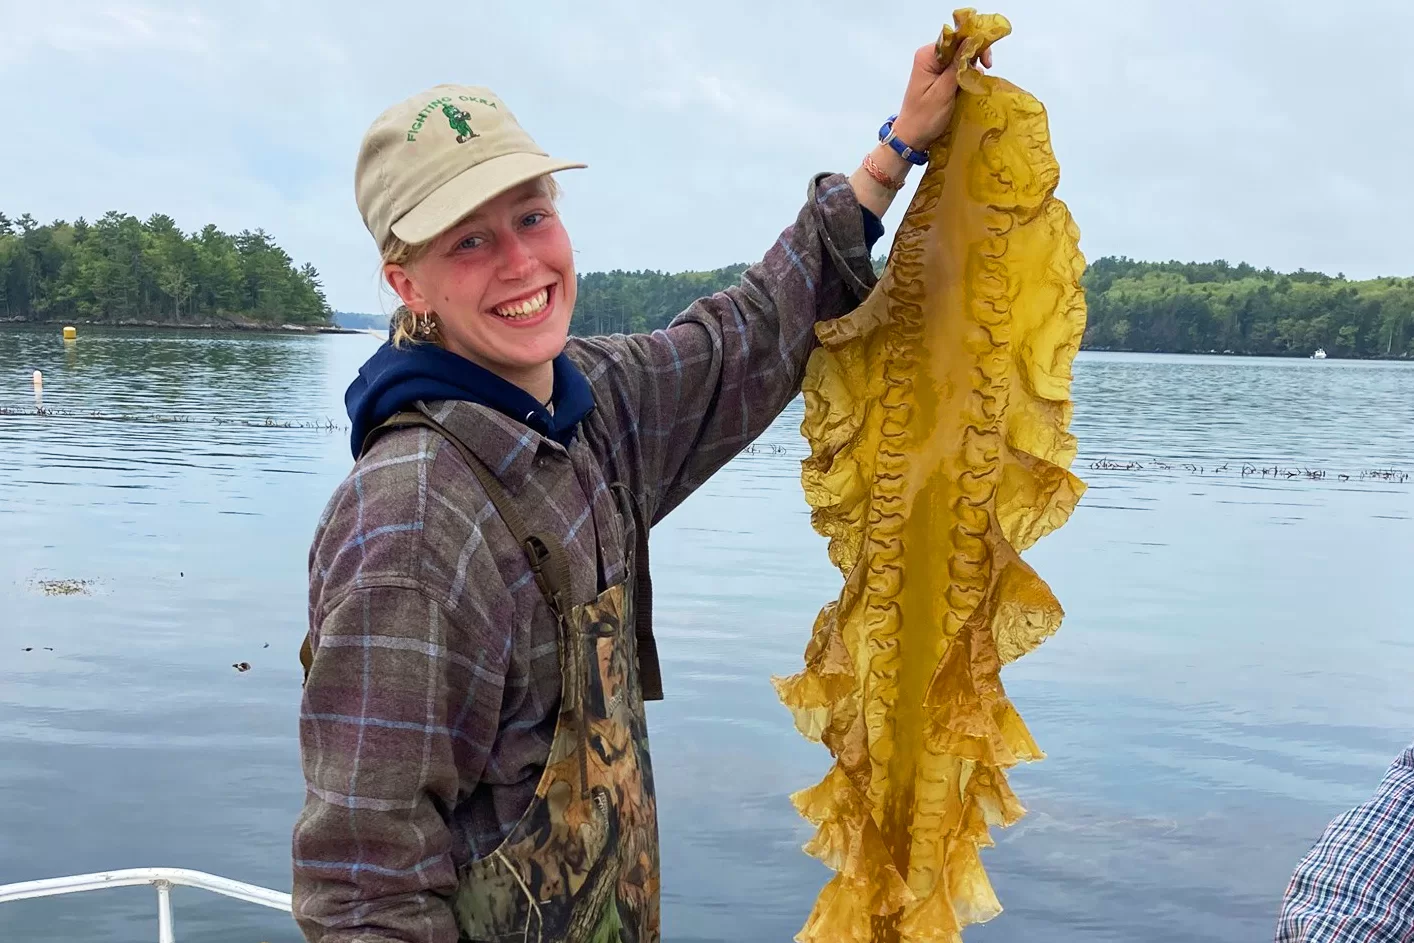 In July 2017, Essie Martin '22 brandishes a leaf of kelp while working at Maine Sea Farm, which grows kelp for harvest in Walpole, Maine. (Photograph courtesy of LIncoln Academy)